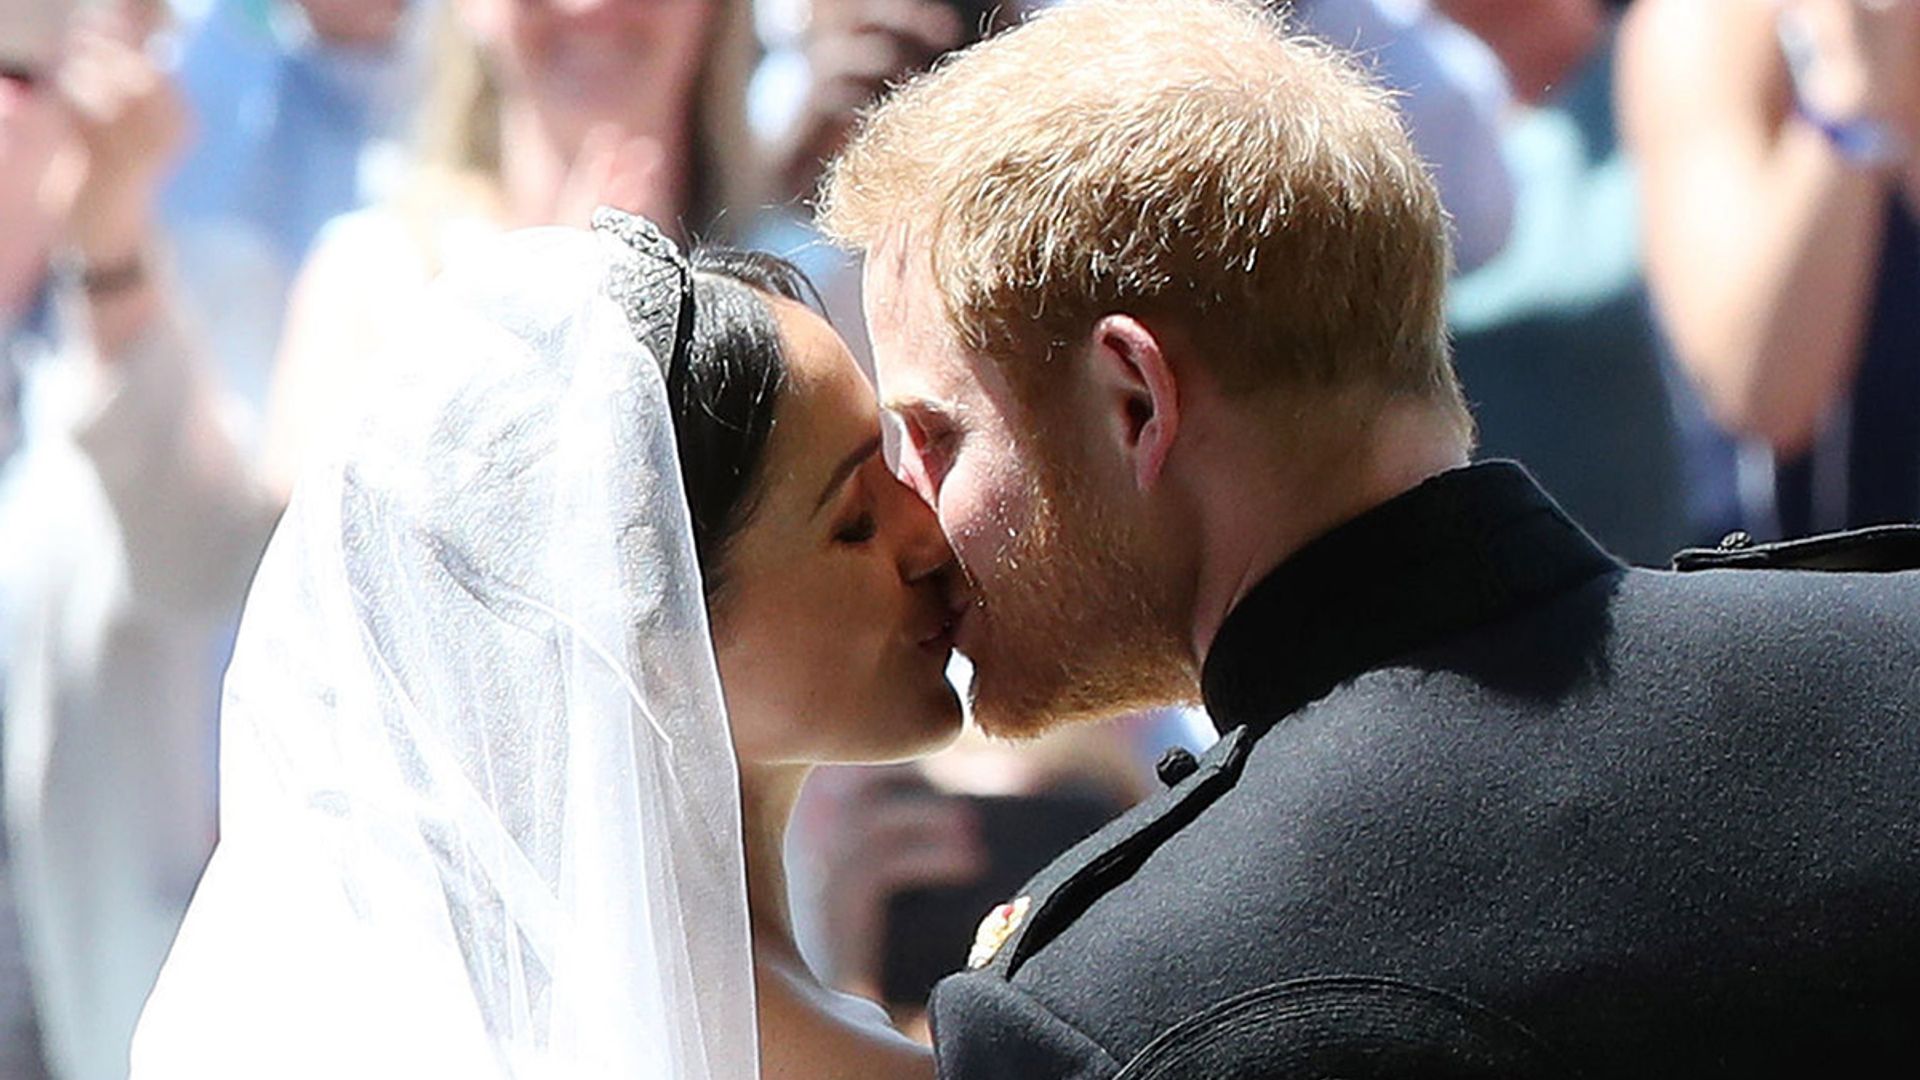 Behind-the-scenes photos of Prince Harry and Meghan Markle's royal wedding revealed